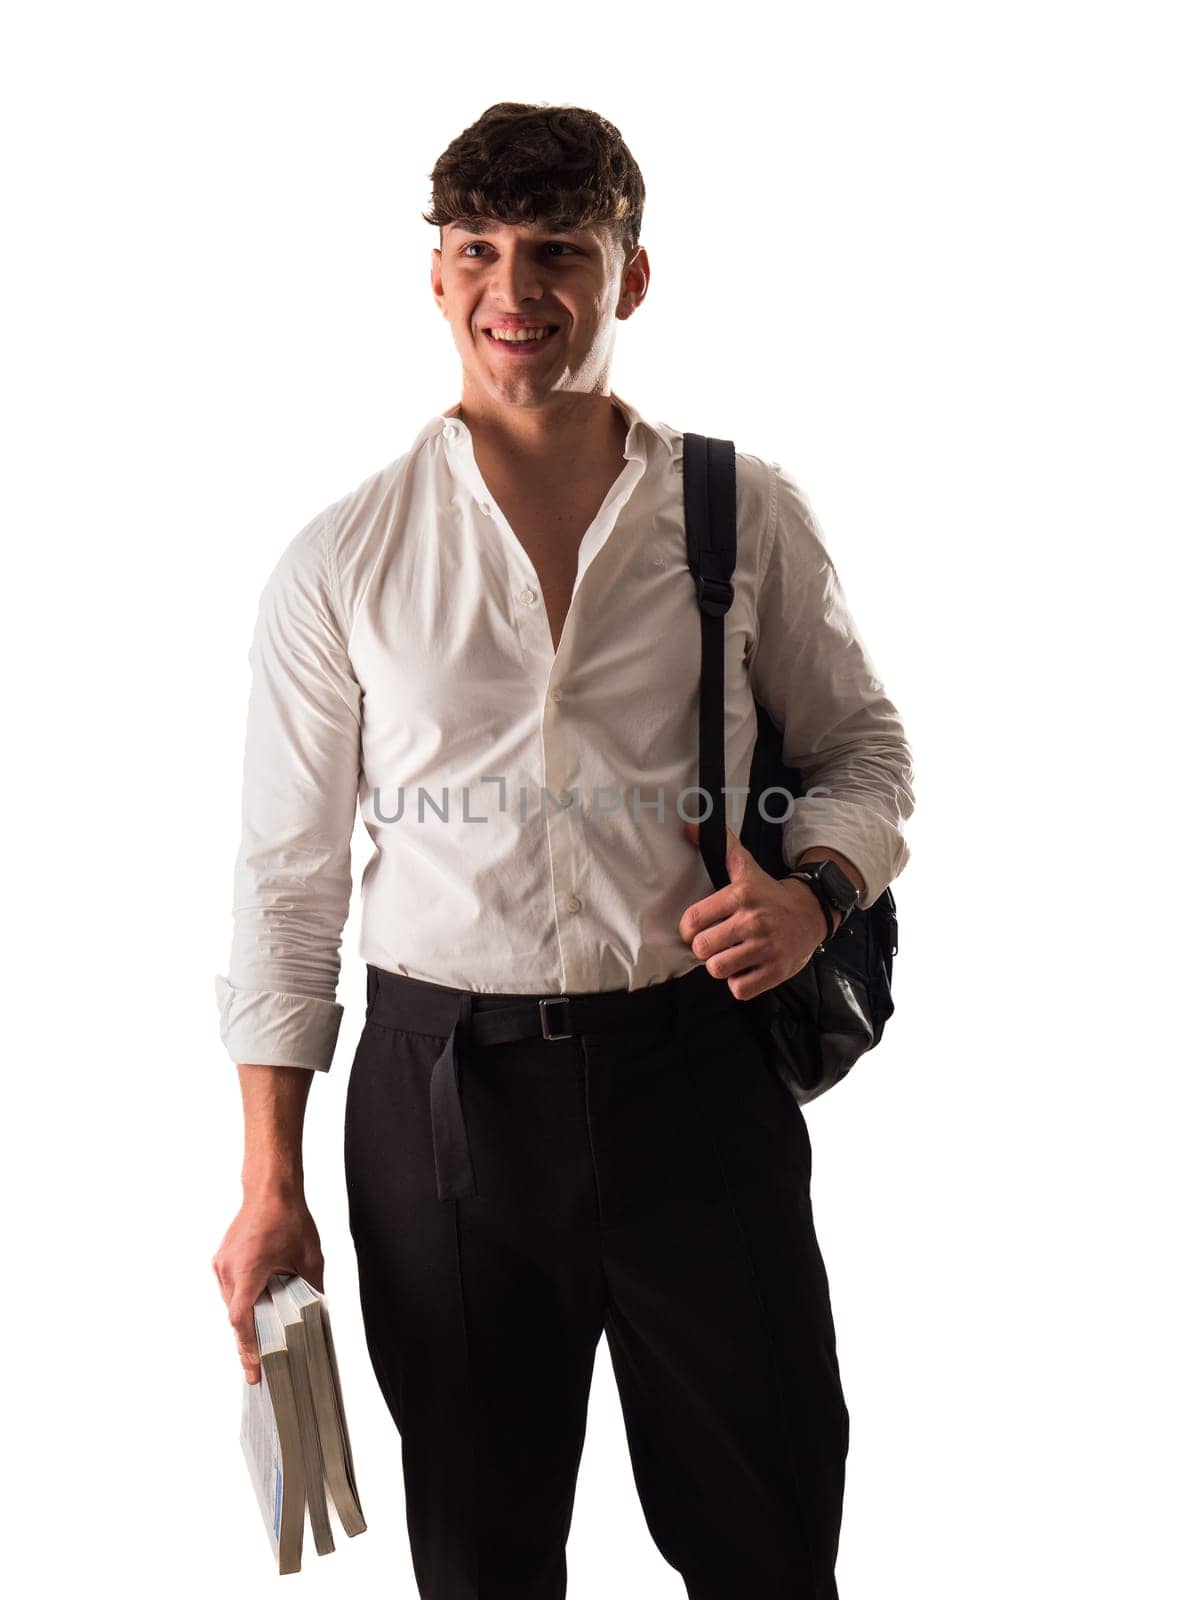 A young attractive man in a white shirt and black pants, a smiling student with backpack and books in one hand